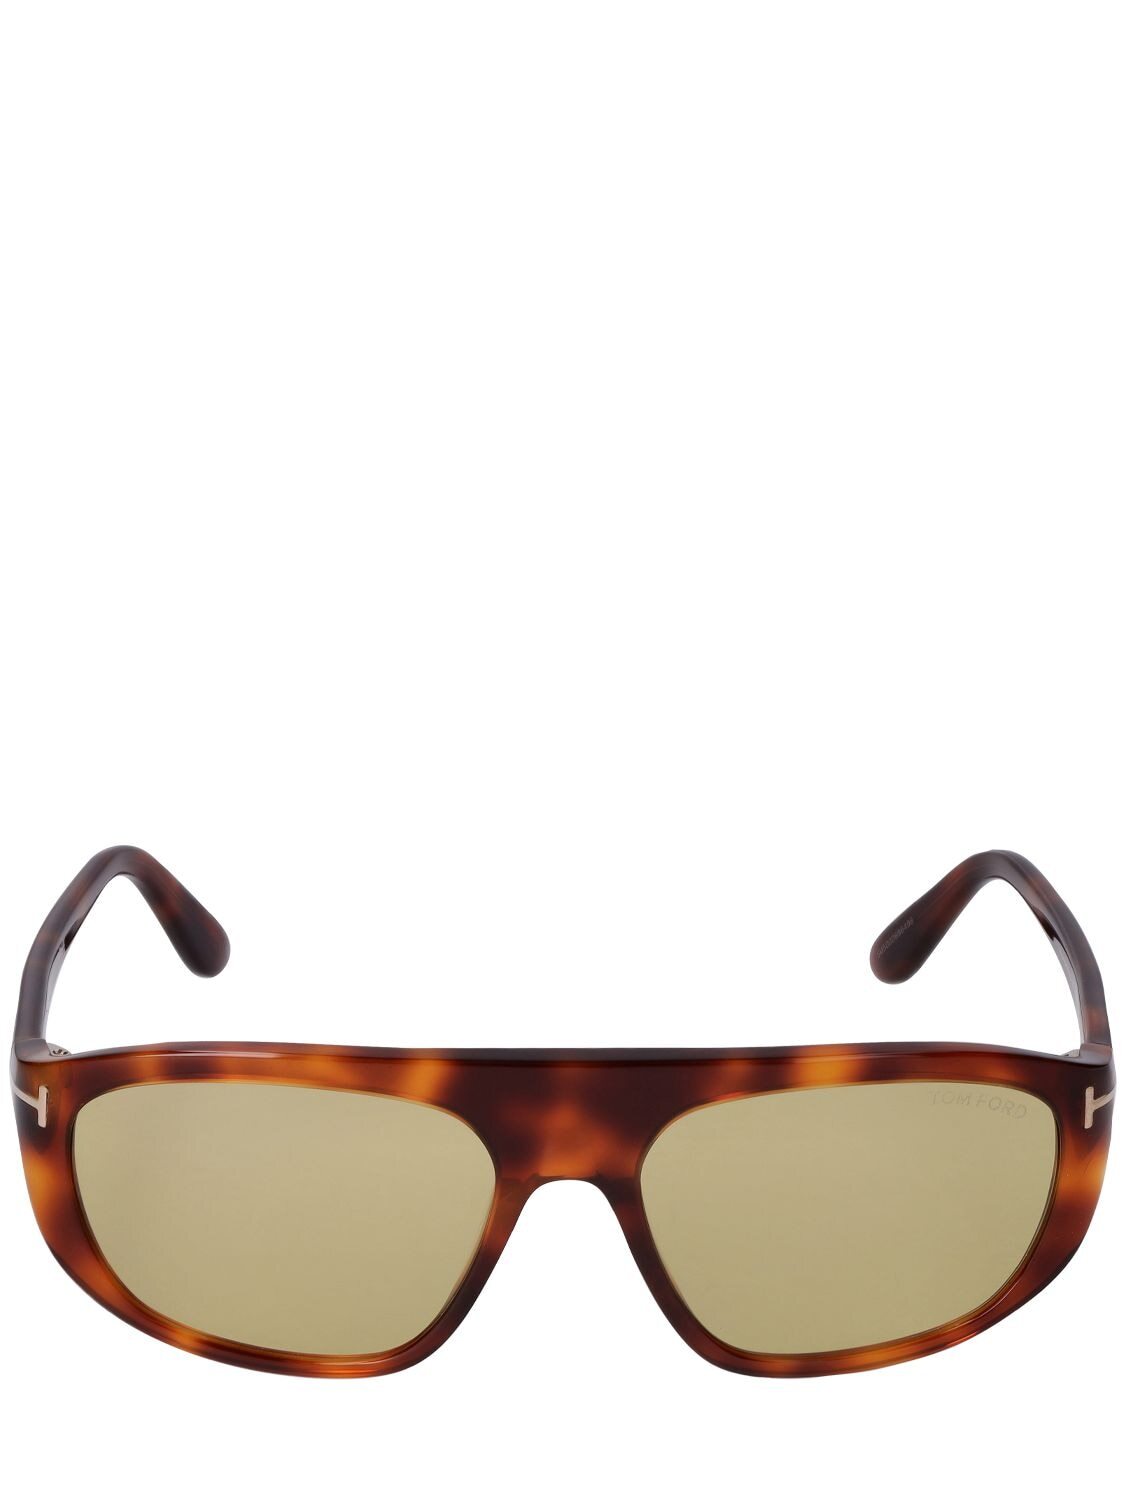 TOM FORD Edward Squared Acetate Sunglasses in brown